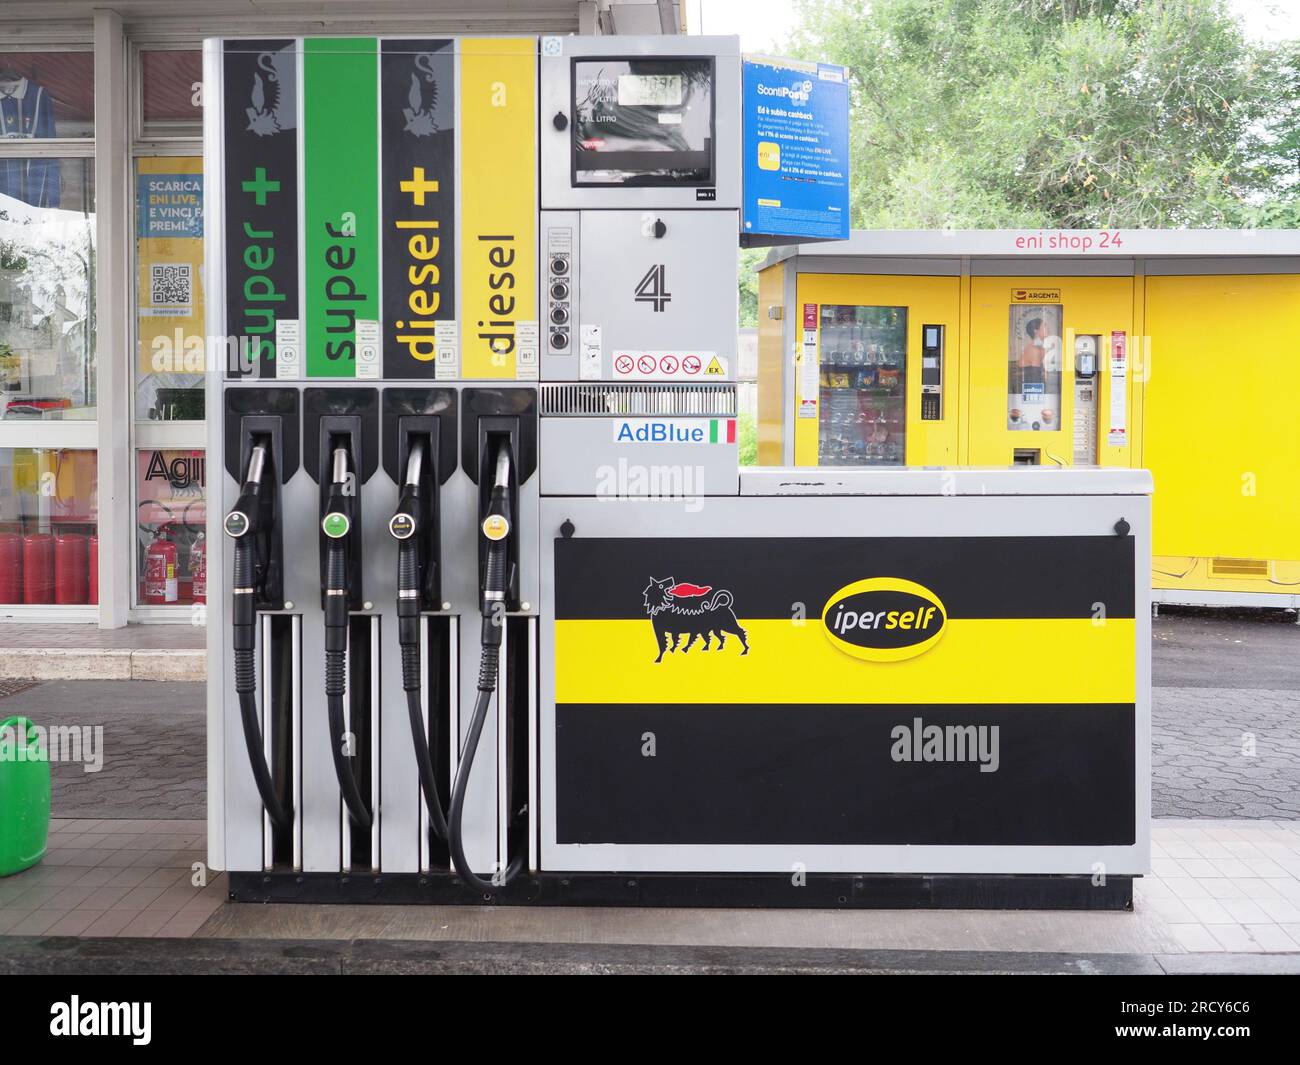 Cremona, Italy - July 3 20223 Self service modern fuel pump at Eni Agip  italian gas station Stock Photo - Alamy